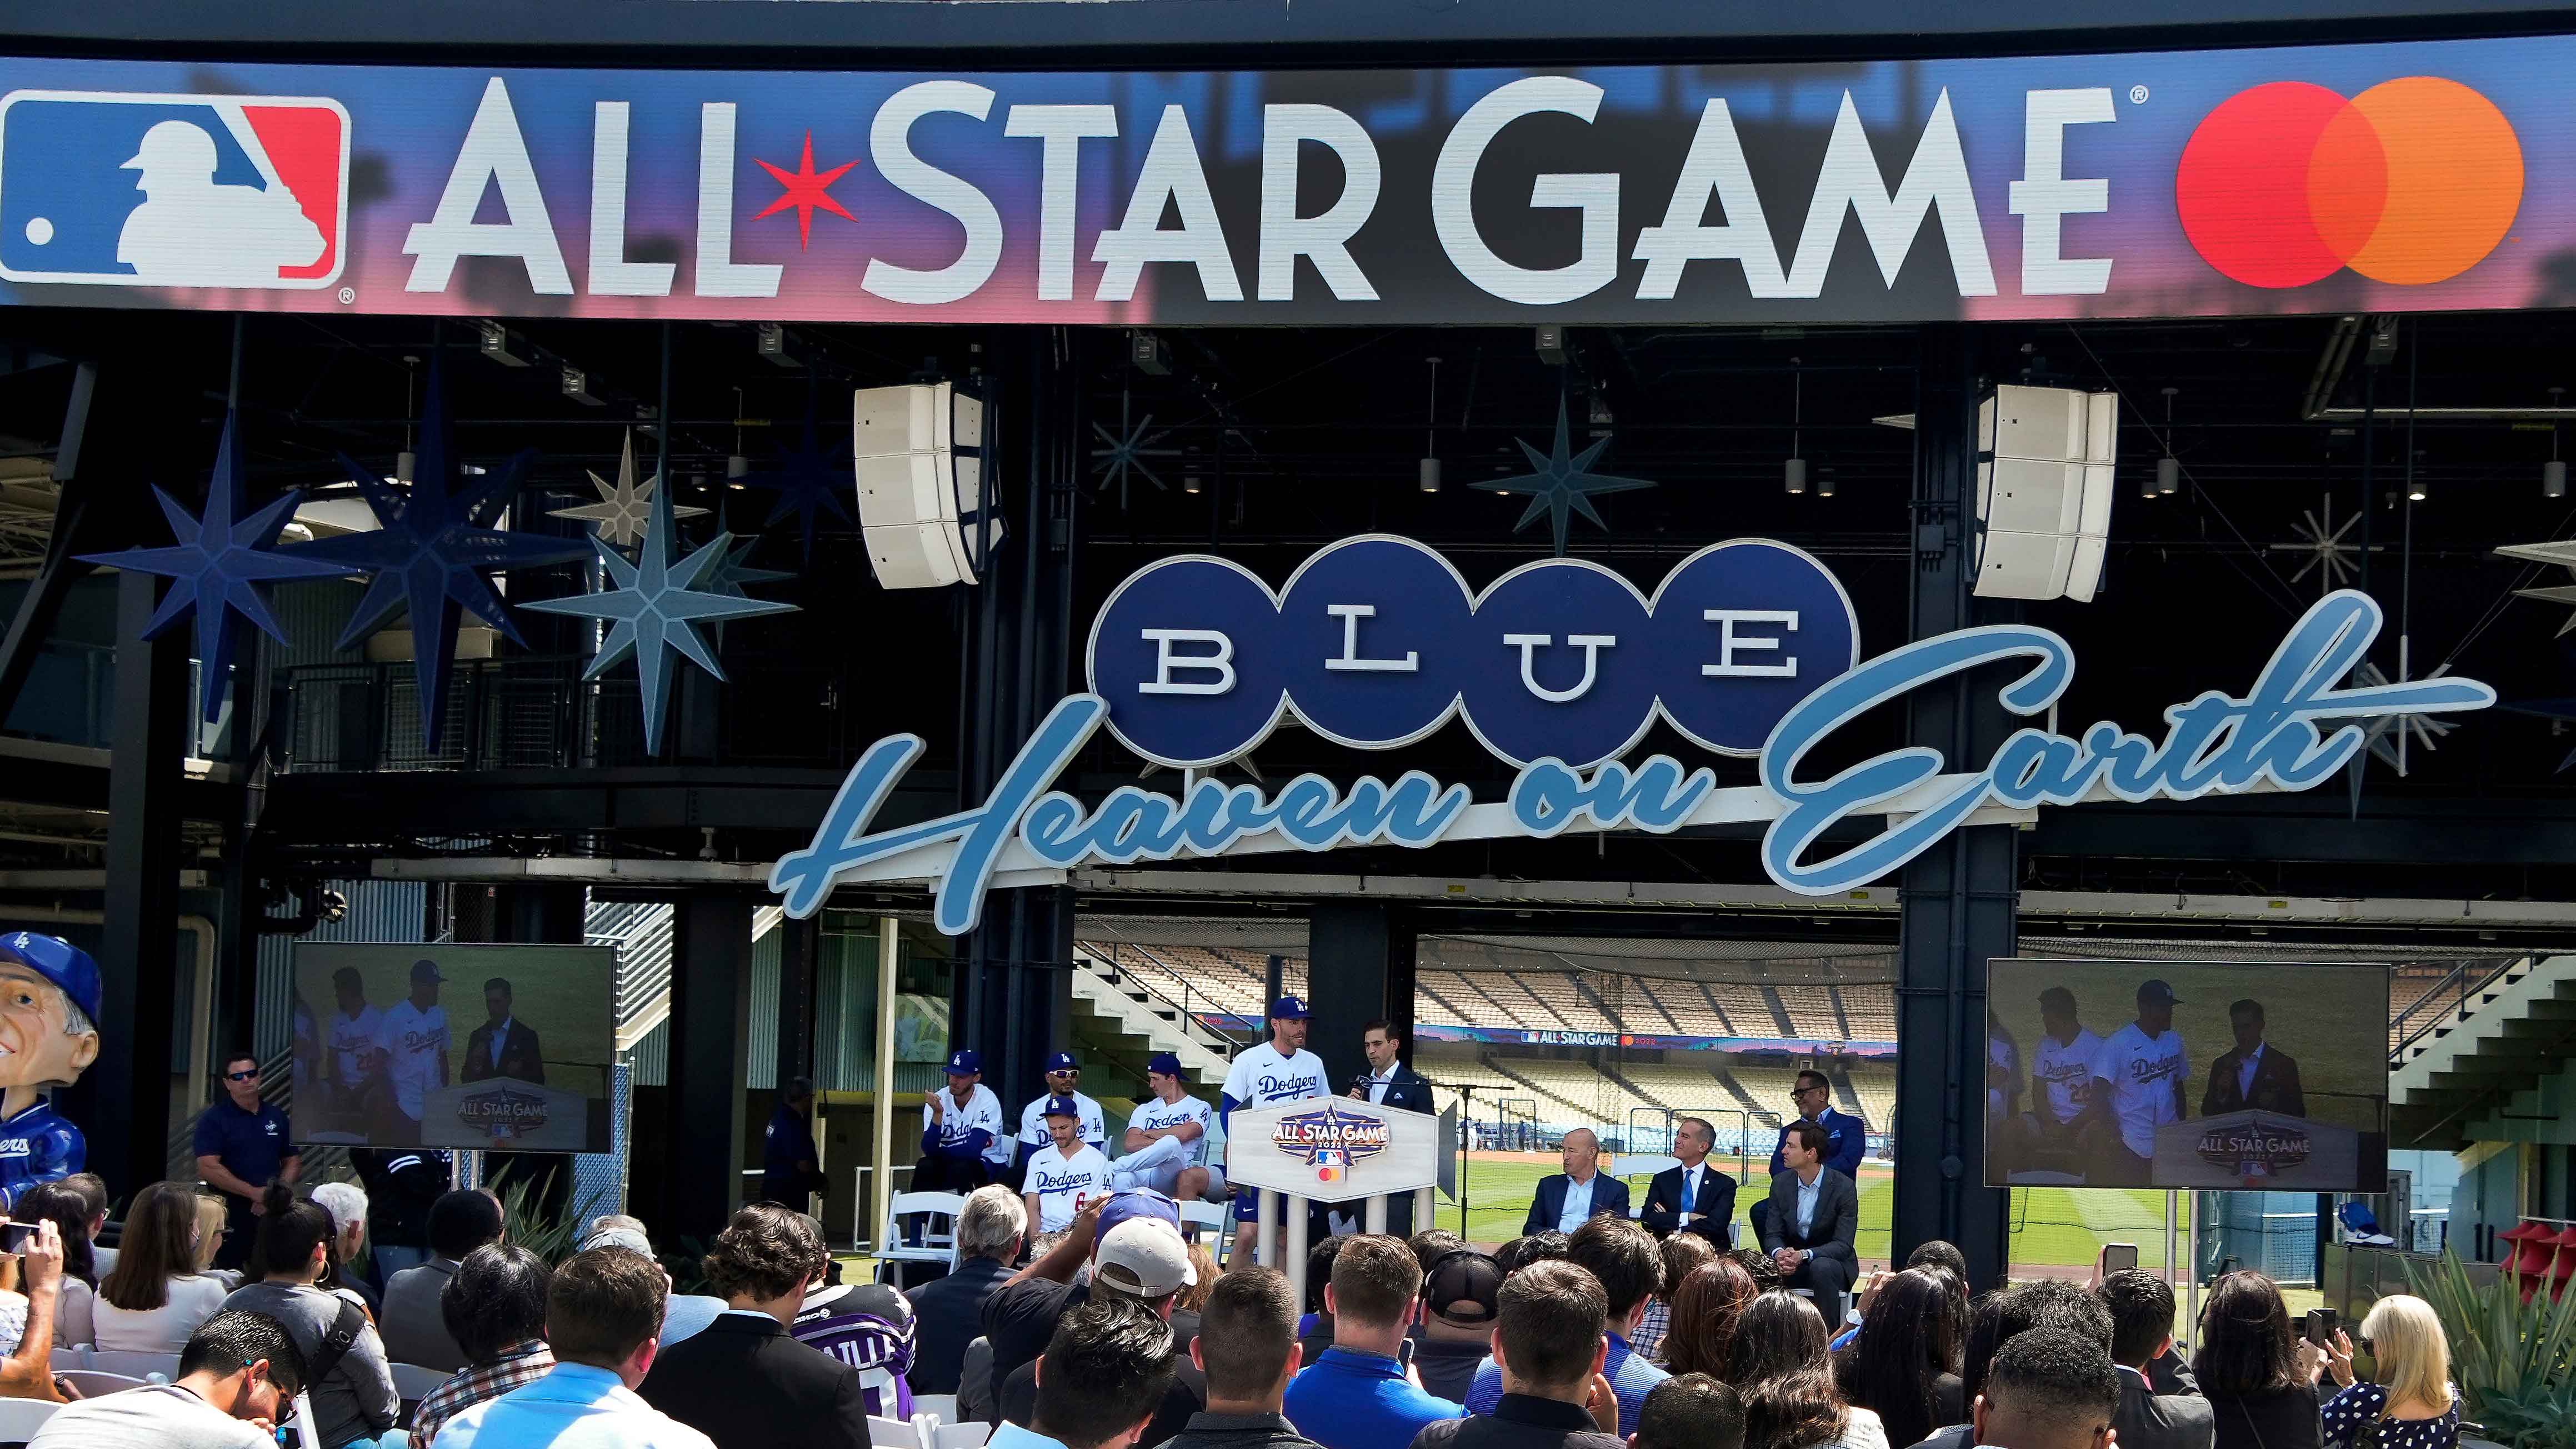 From ugly Nike uniforms to nonstop promo glop, the MLB All-Star